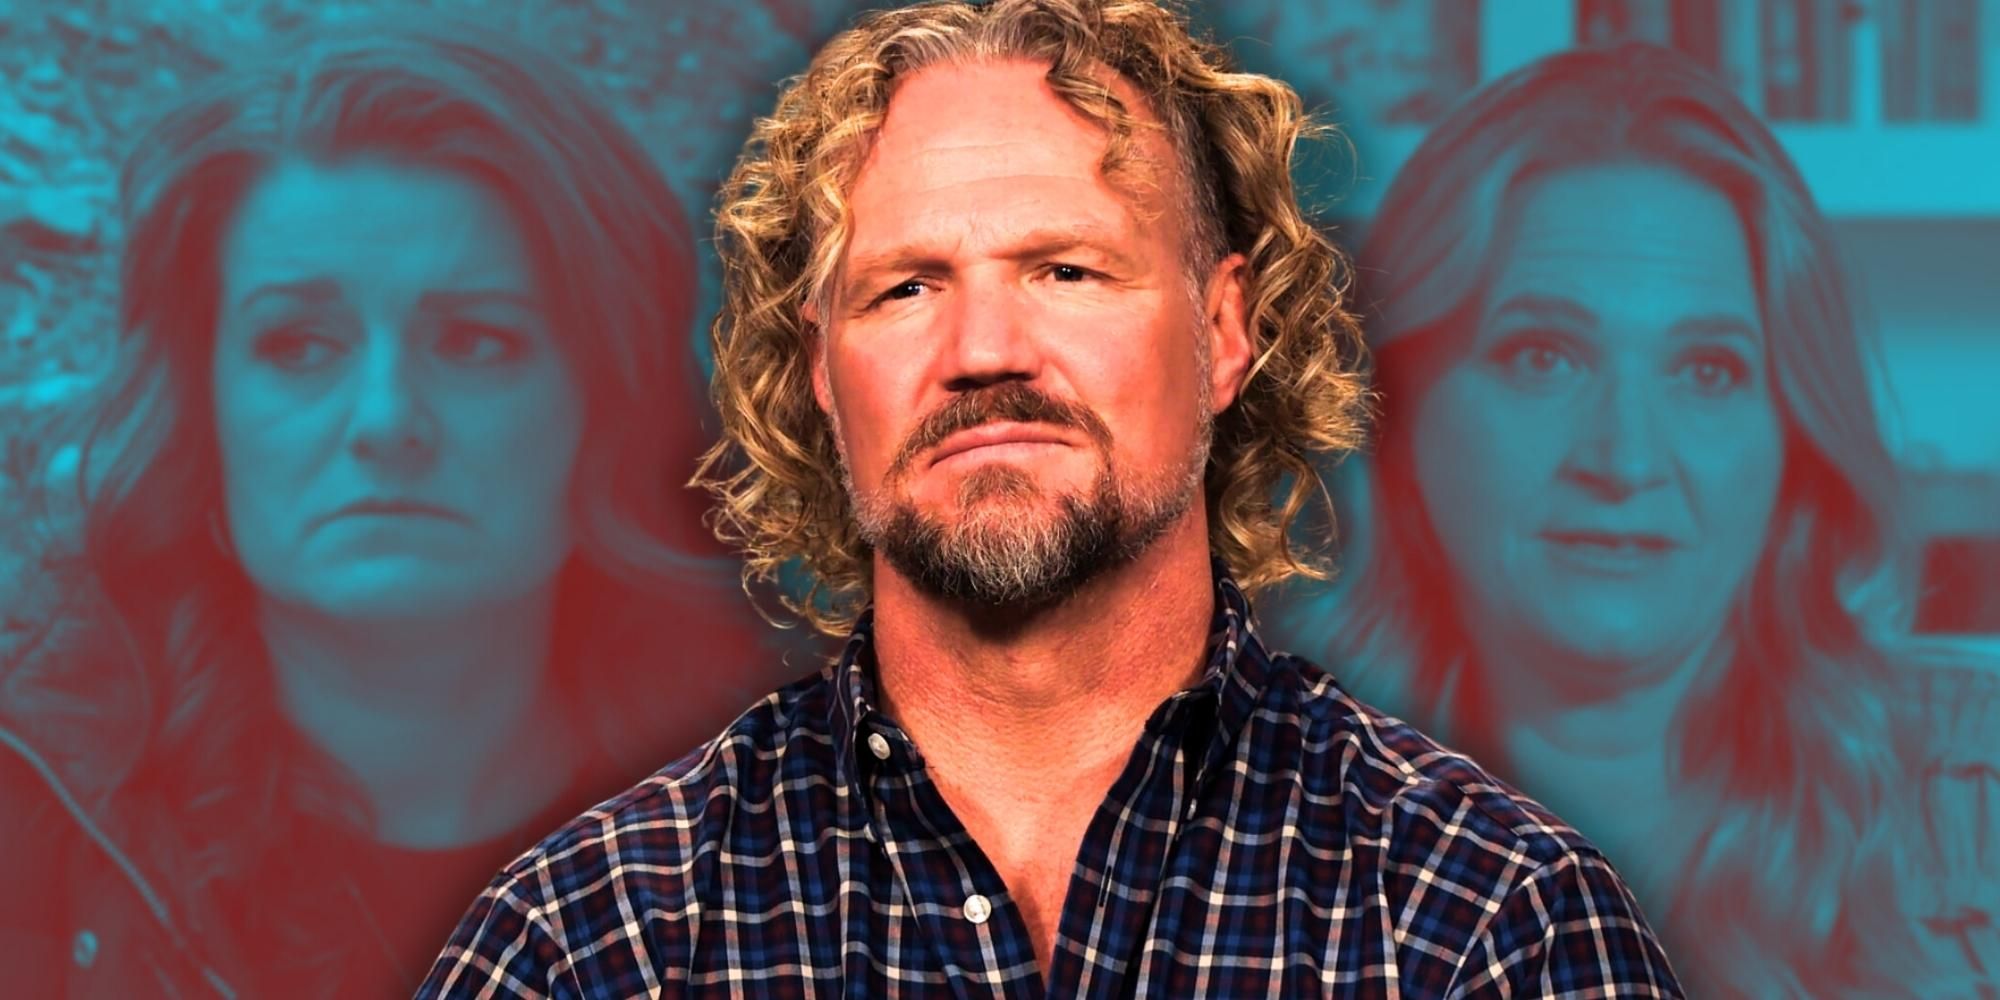 Sister Wives' Leon Brown & Audrey Kriss Get Married In Secret Ceremony